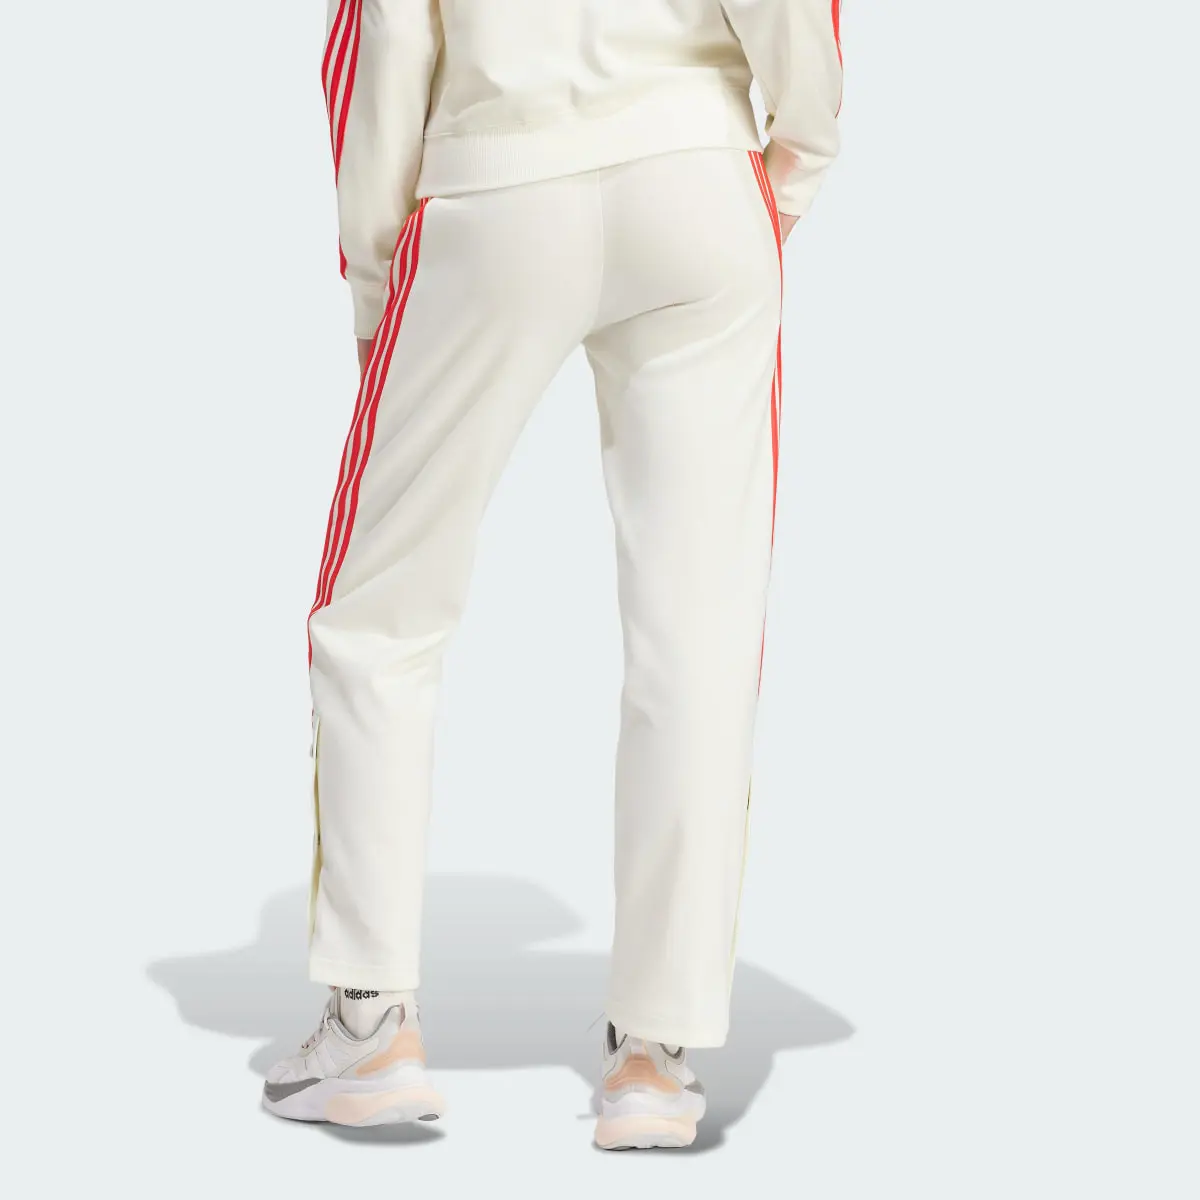 Adidas Iconic Wrapping 3-Stripes Snap Track Pants. 2